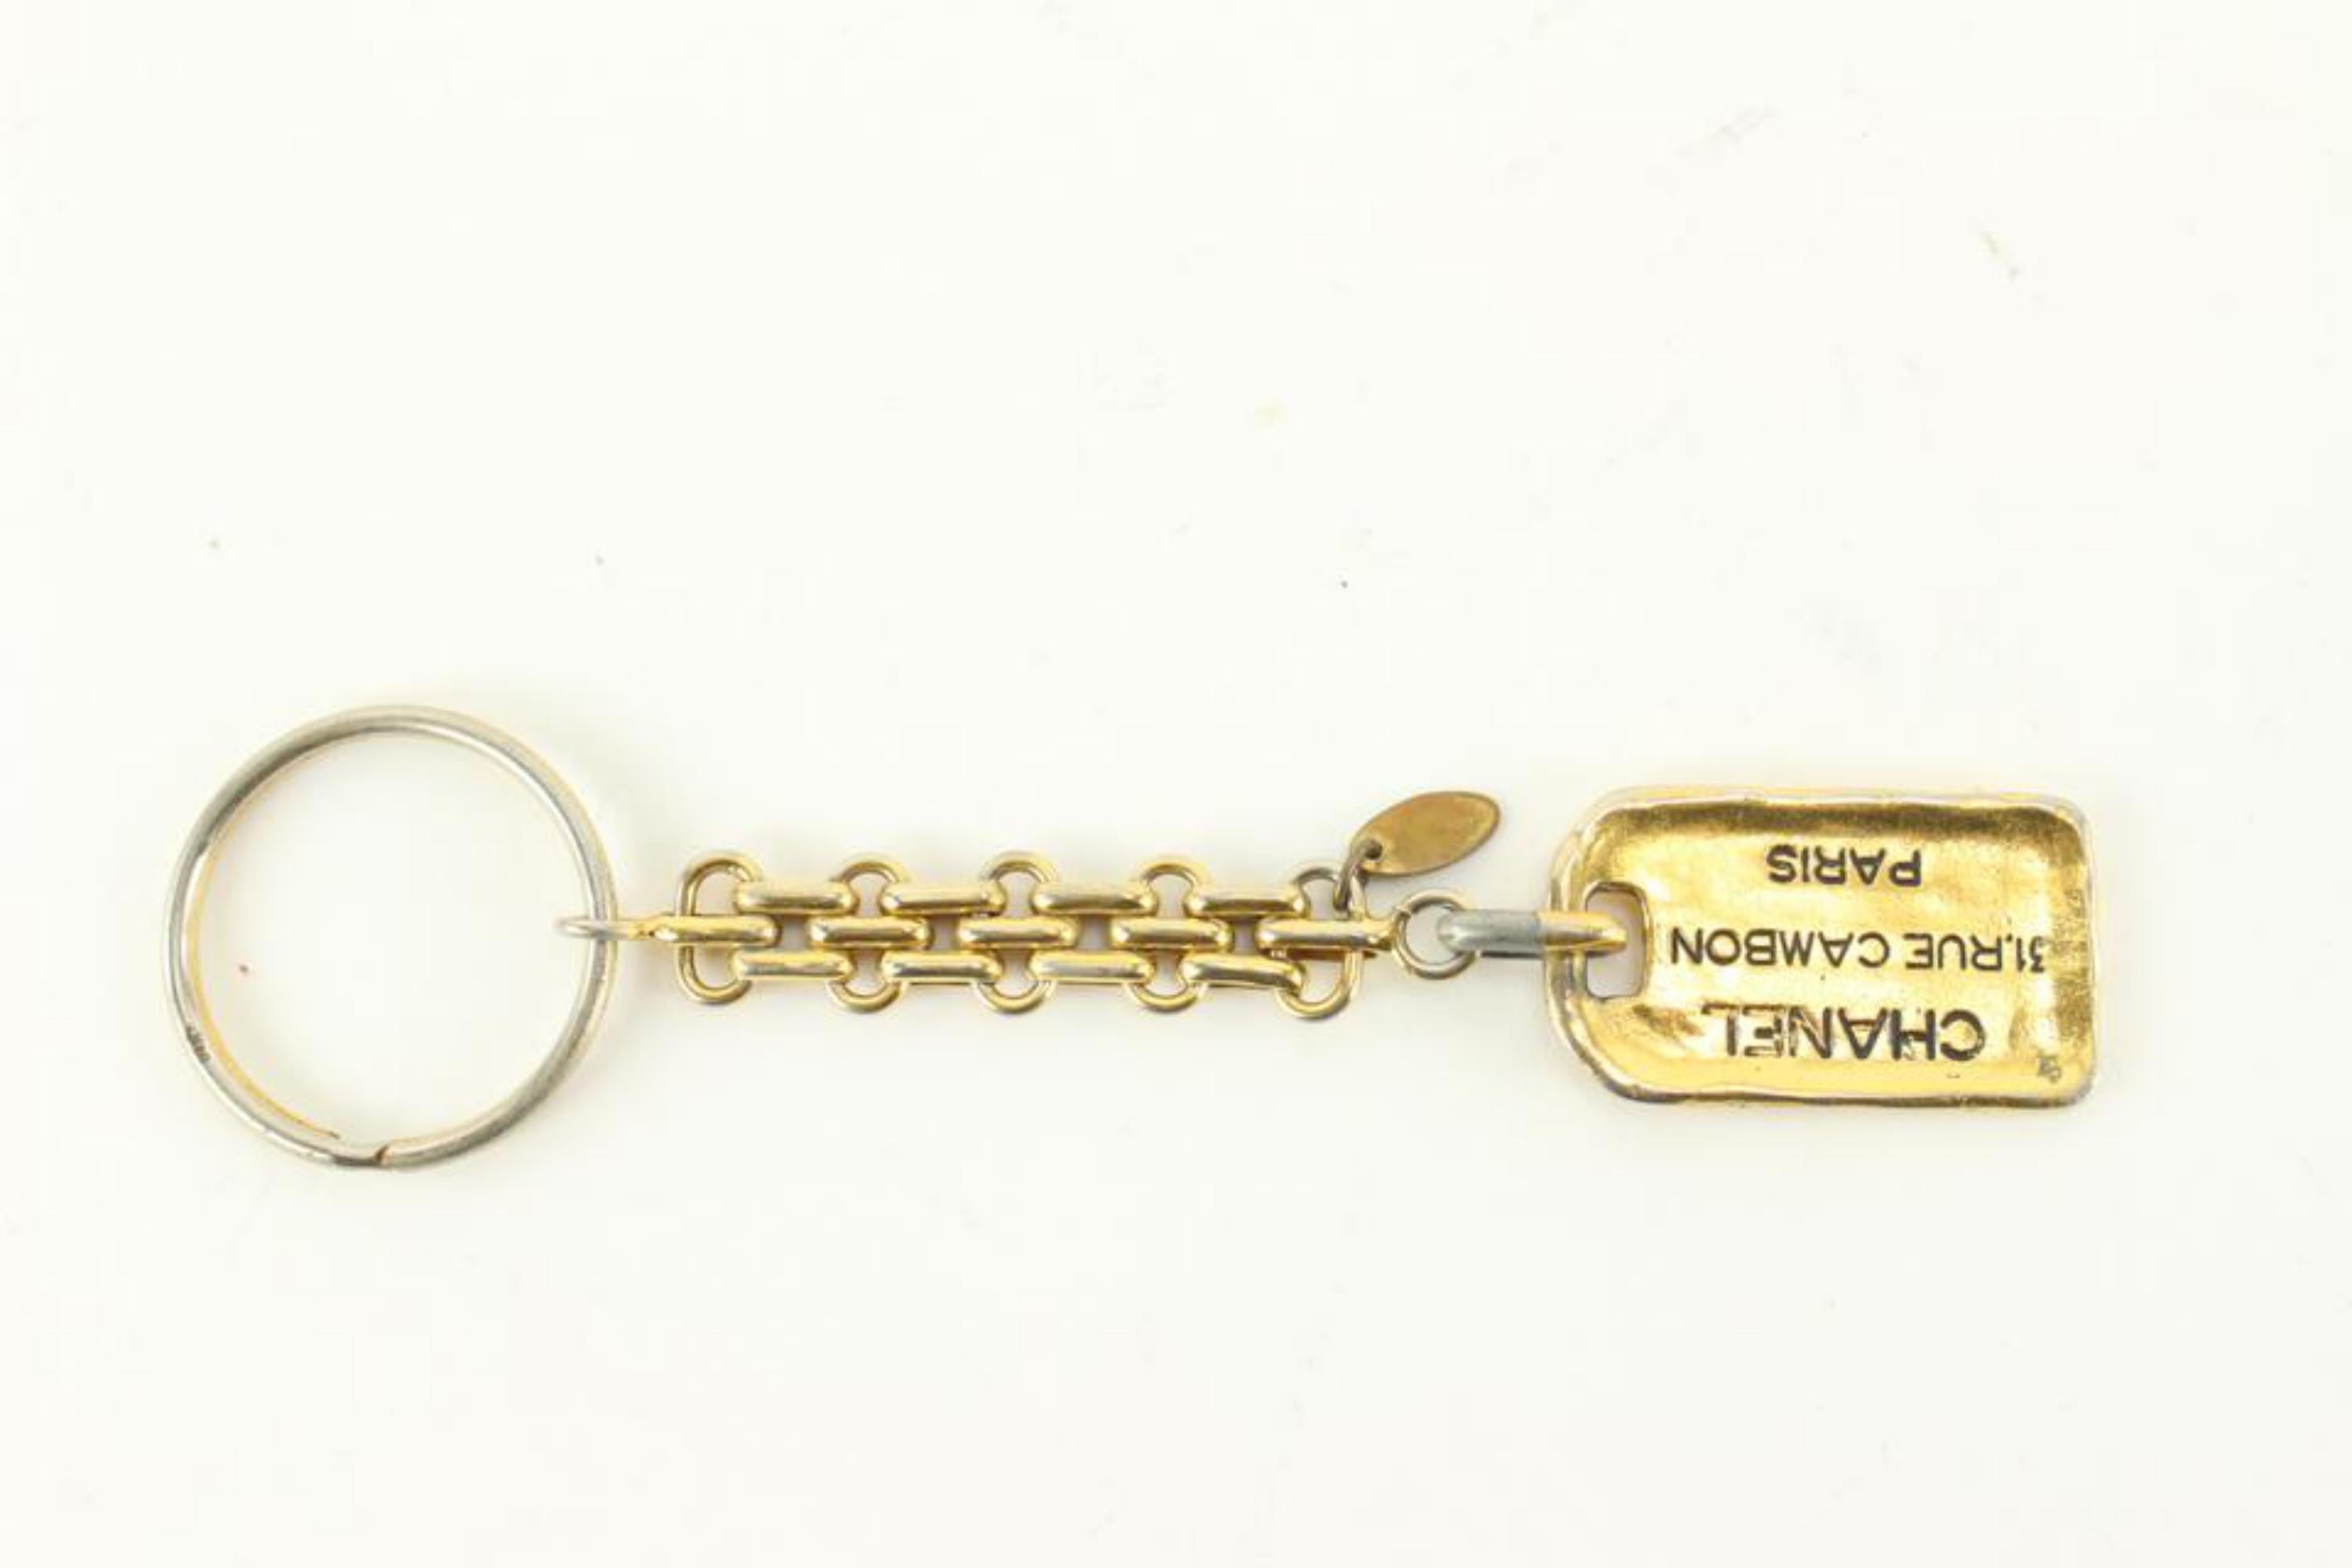 Chanel Vintage Gold Plated Rue Cambon CC Keychain Bag Charm Pendant 81ca711s 5